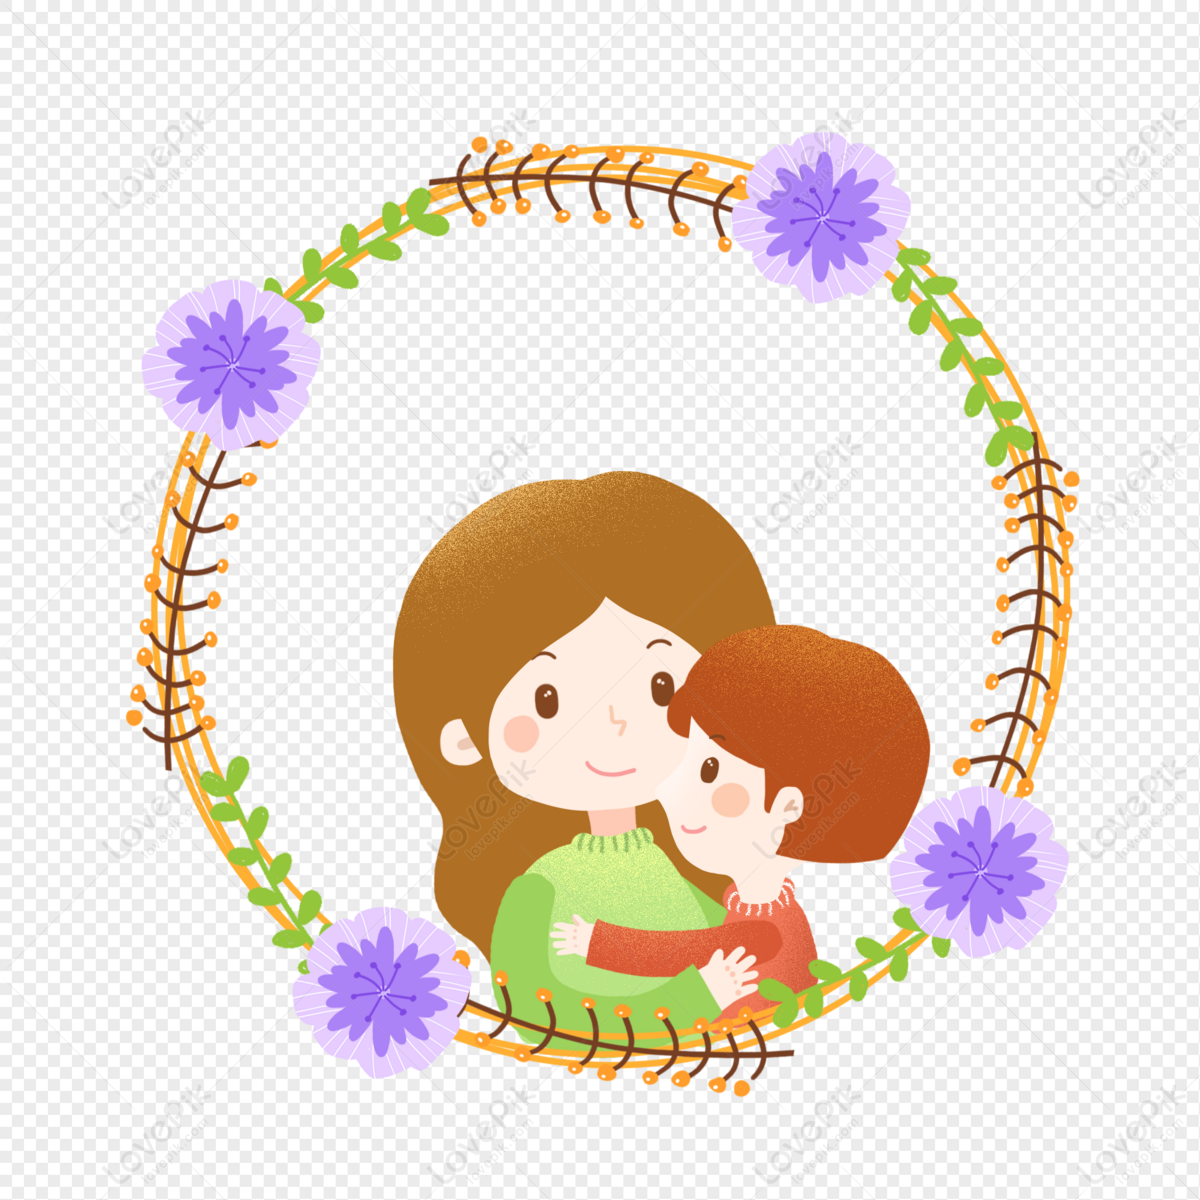 11,709 Mothers Day Drawing Black White Images, Stock Photos, 3D objects, &  Vectors | Shutterstock